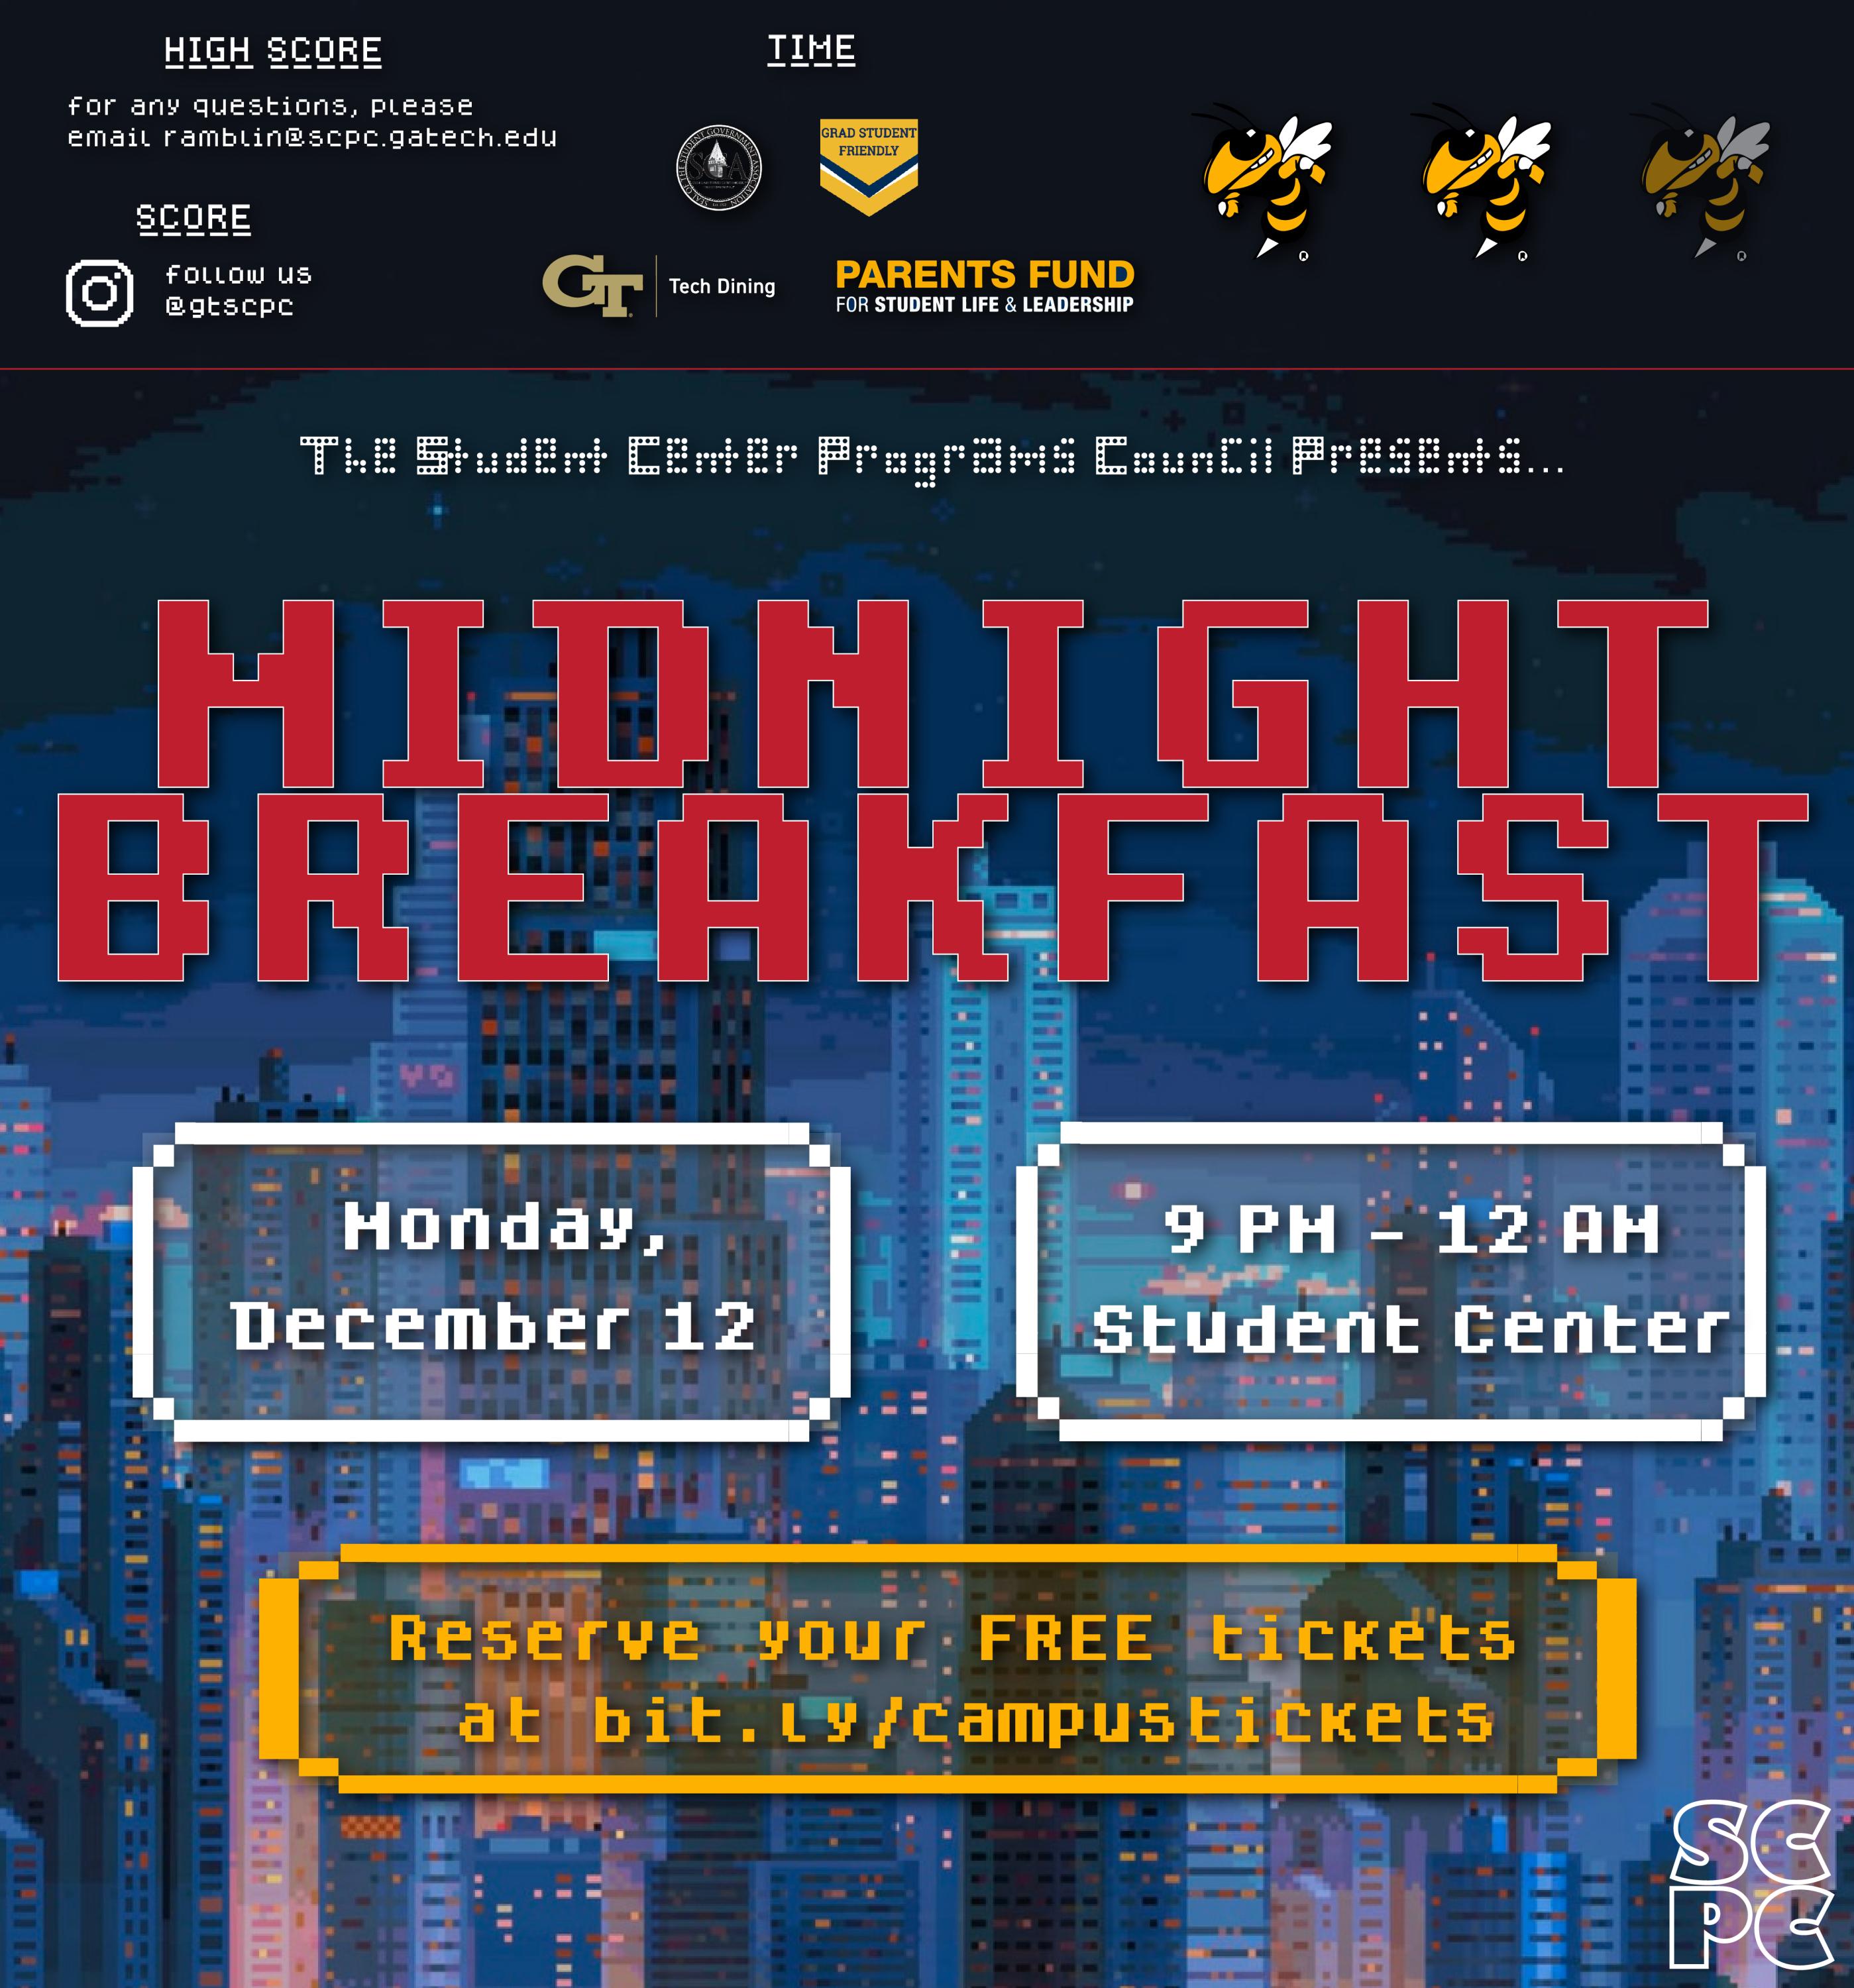 Join SCPC on December 12th from 9pm to 12am for our semesterly events: Midnight Breakfast and Relaxation Fest! For Midnight Breakfast, we will include a variety of breakfast options such as Pork bacon, Southern-style grits, Scrambled eggs, French toast, and Home fried potatoes! We will also have other limited vegan and vegetarian options. For Relaxation Fest, we will have karaoke, laser tag, and other arts and crafts to de-stress!